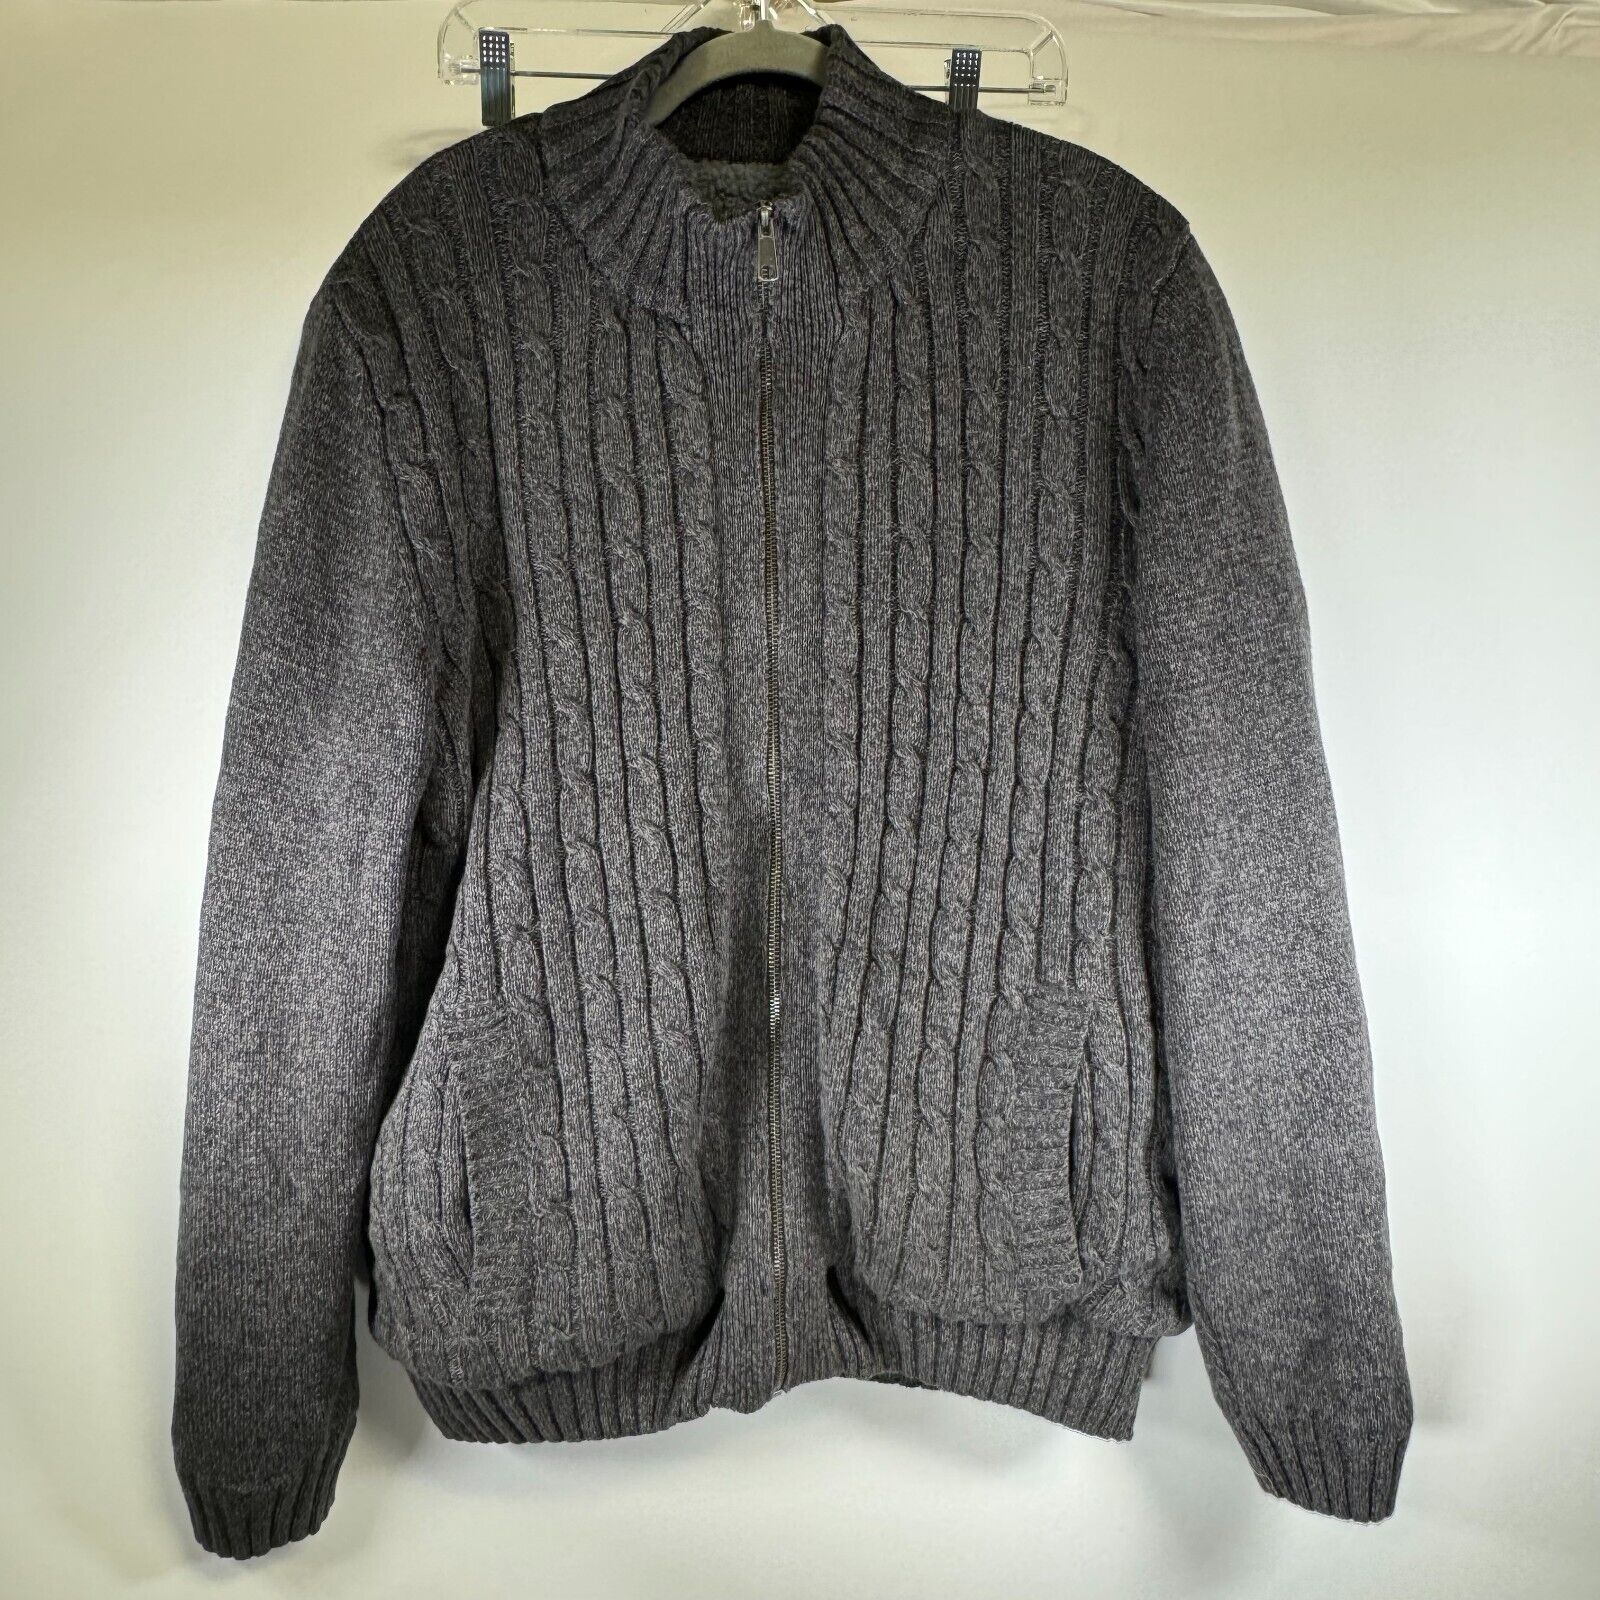 Boston Traders Cardigan Sweater Gray Cable Knit Fleece Lined Full Zip Mens XXL